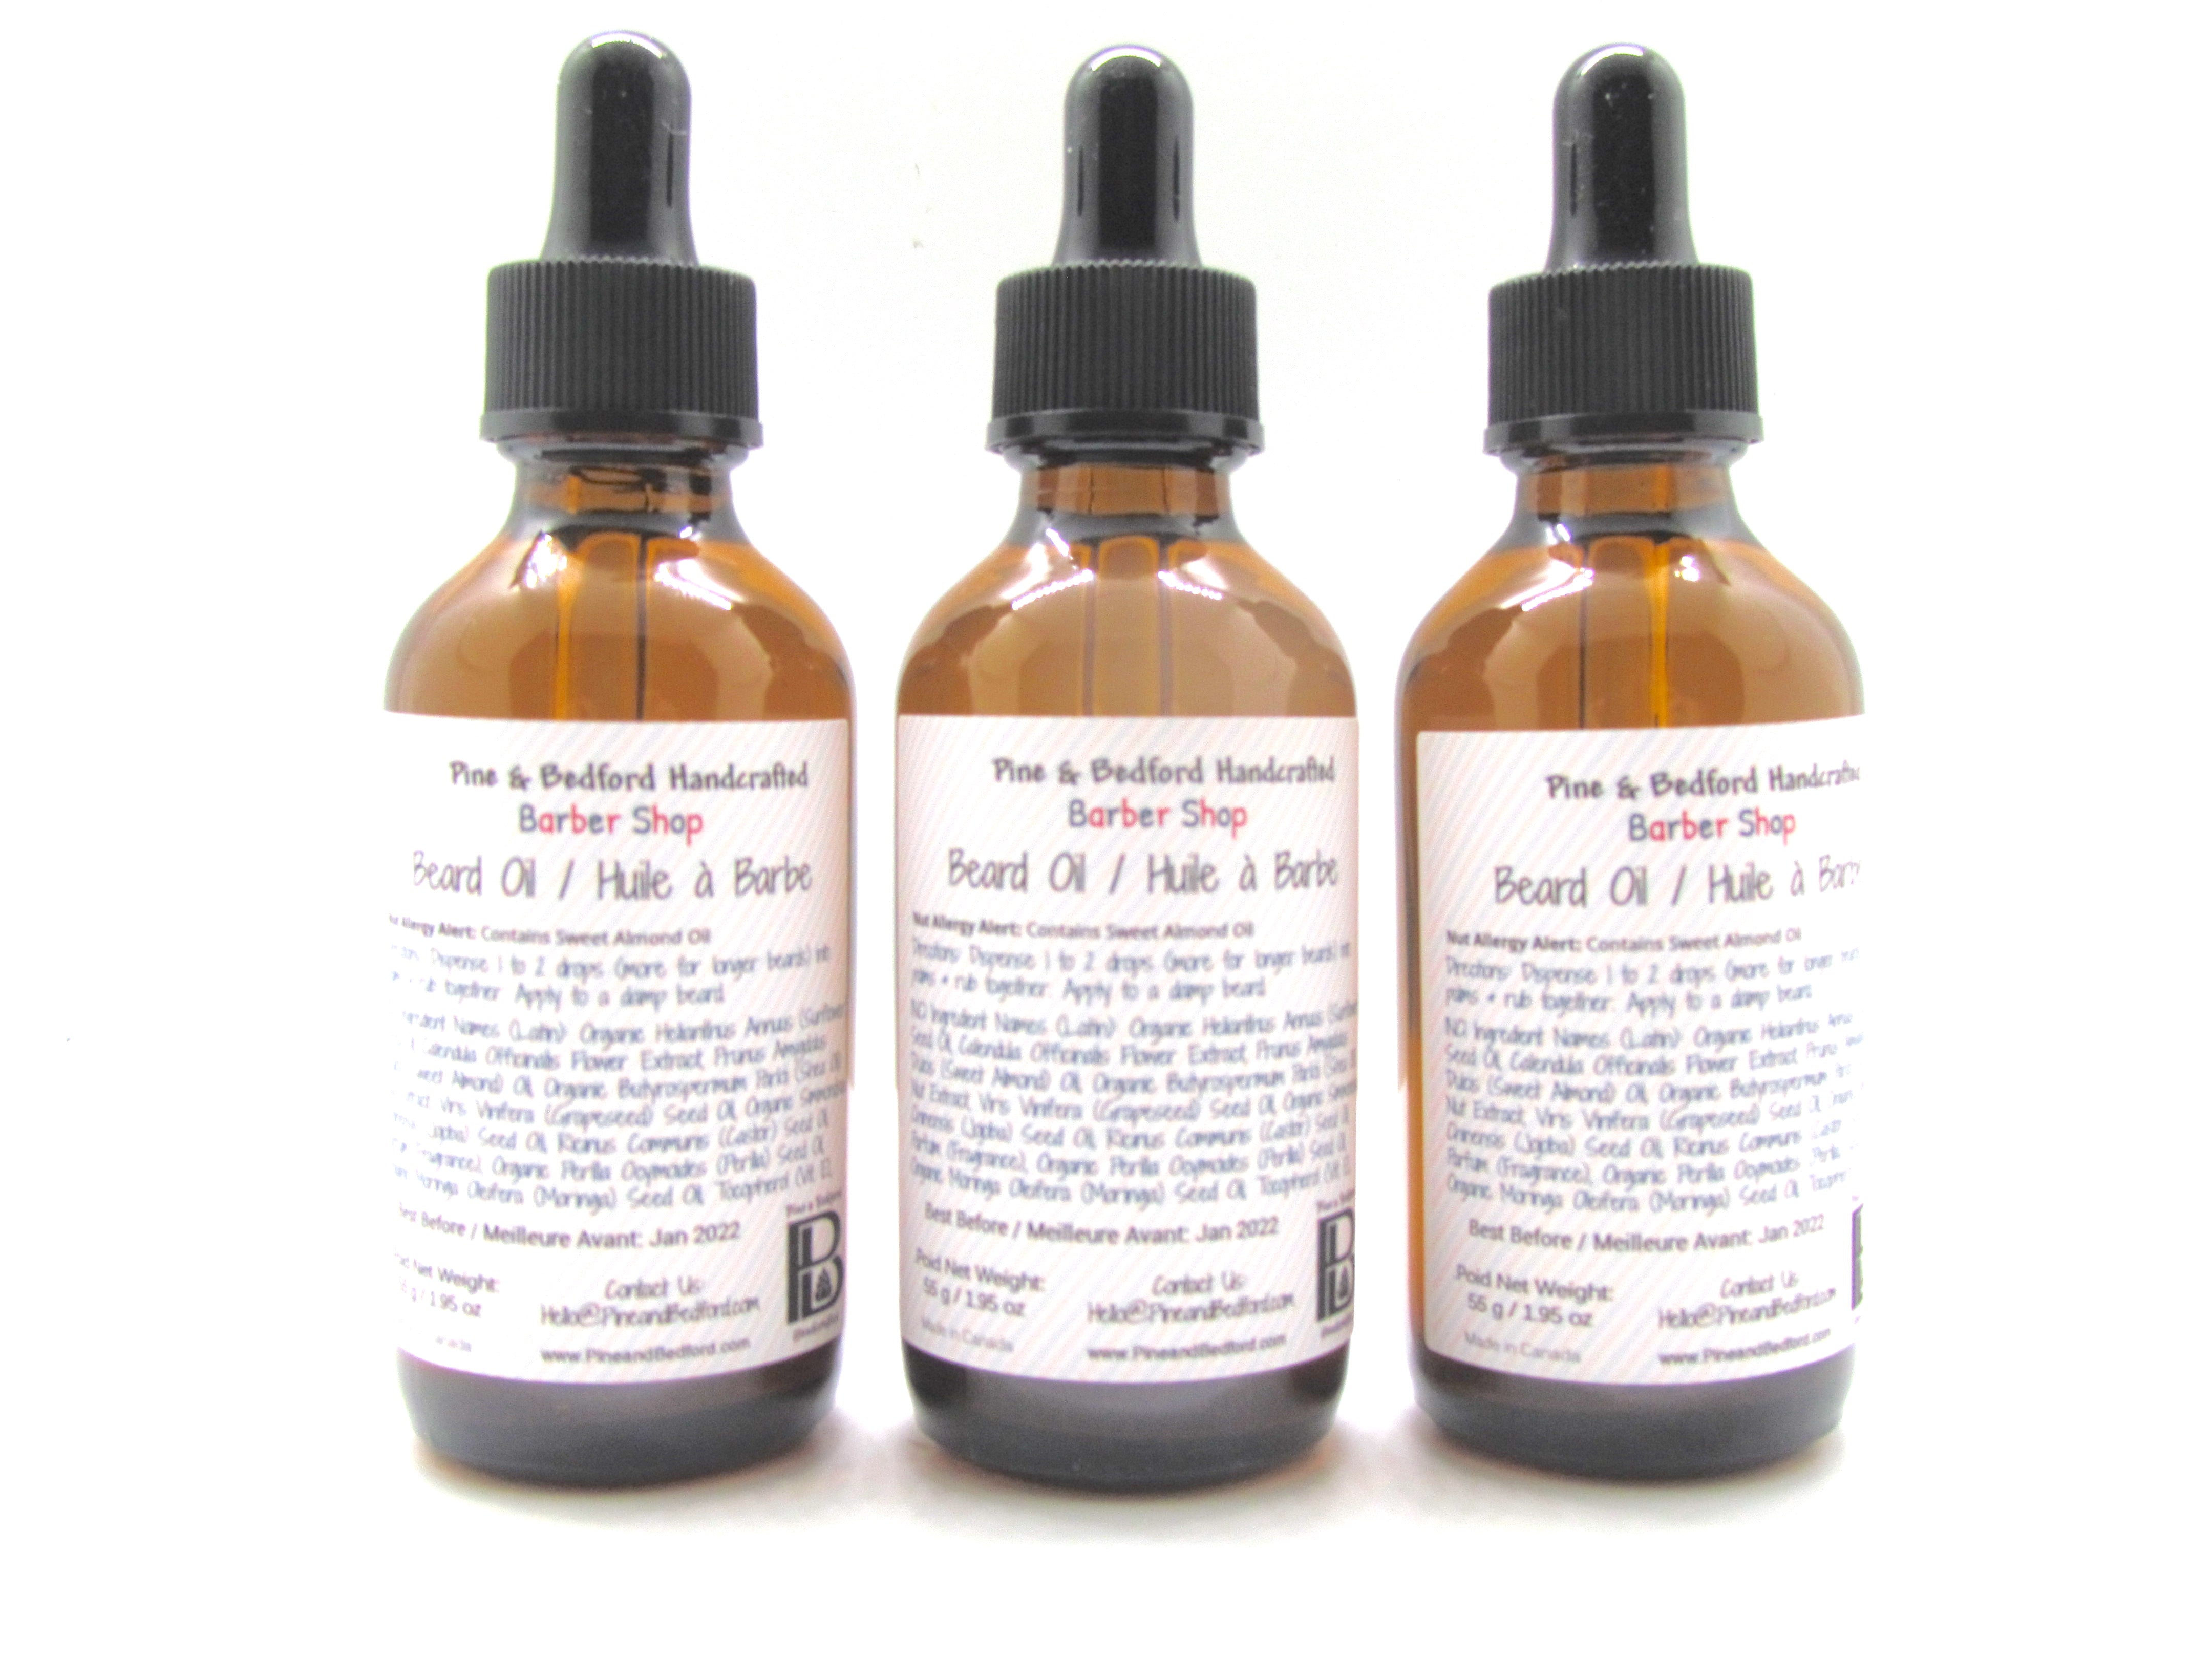 Pine and Bedford's Beard Oil contains Organic Calendula infused Sunflower Oil, Grapeseed Oil, Sweet Almond Oil, Rosehip Oil, Shea Oil, Jojoba Oil,  Castor OIl, Perila Oil, Moringa Oil and  Vitamin E.  It has a light barbershop fragrance.  We leverage low comedogenic oils so it will not clog pores while making your beard soft and manageable. Shown here in a 2oz amber dropper bottle.  Net product weight: 1.95 oz.